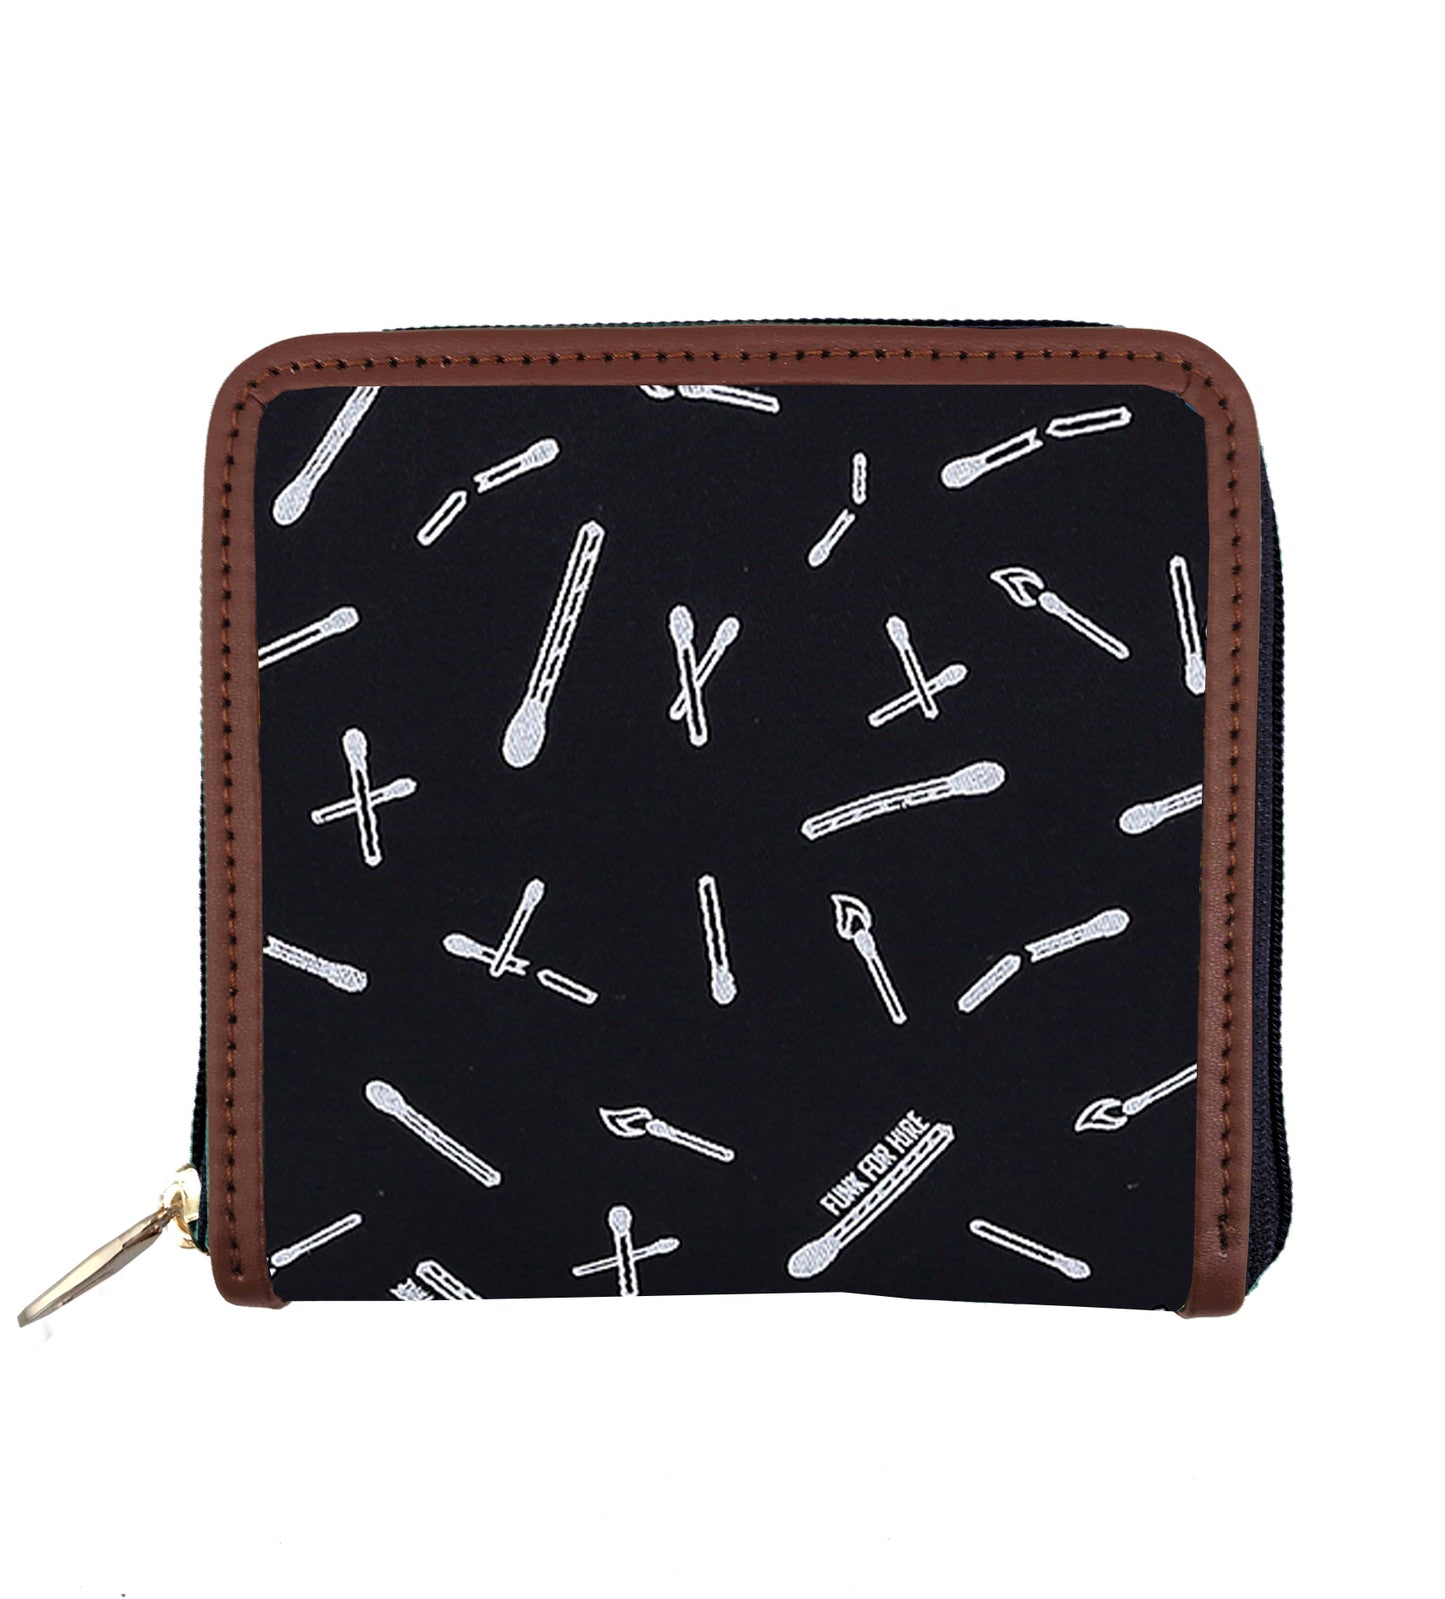 Combo Offers : Match Checks Drawstring Bag & All over Match Square Navy Wallet